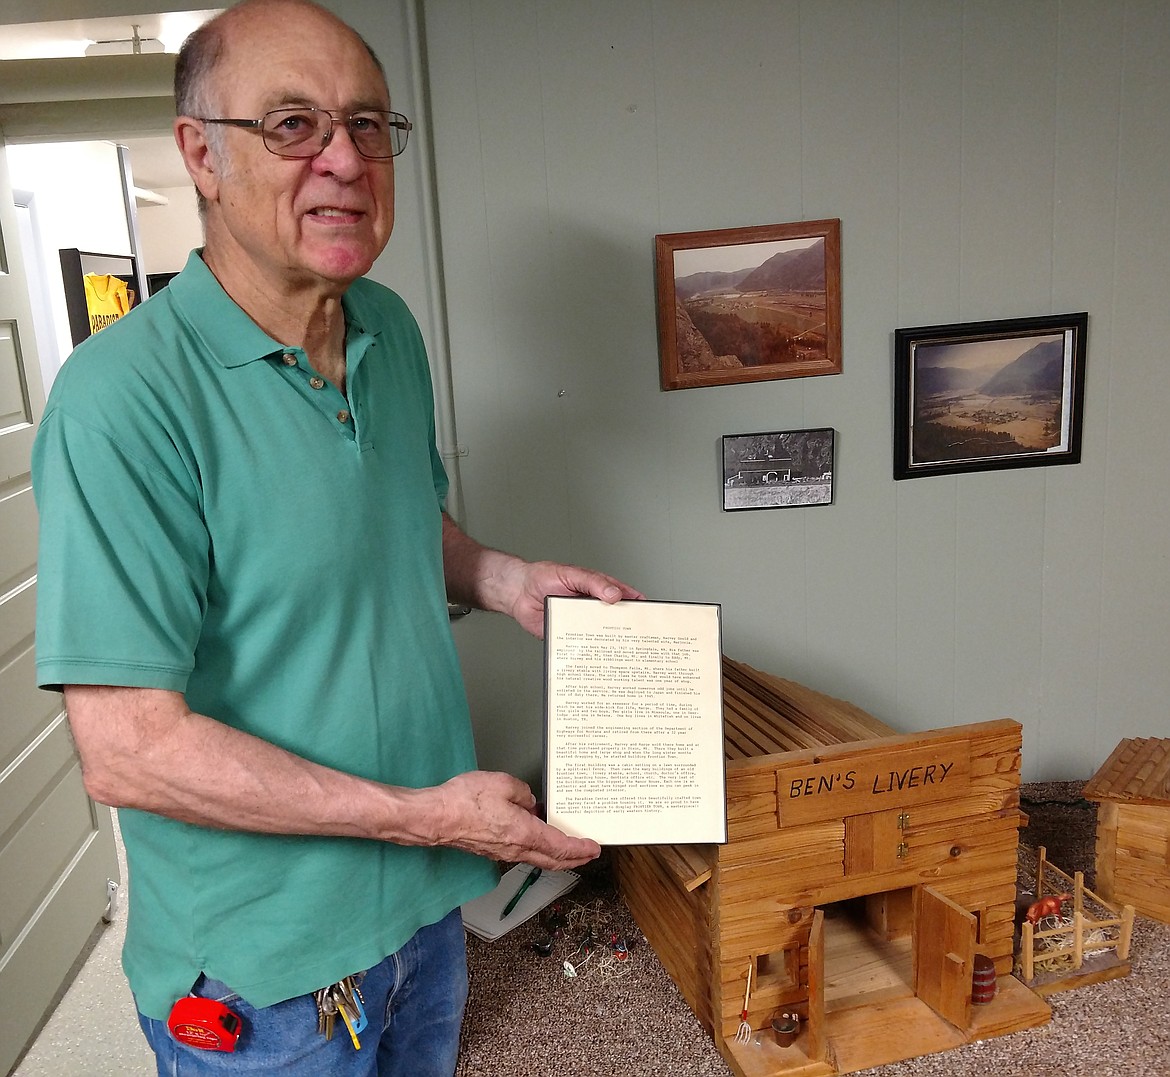 Paradise Elementary School Preservation Committee member John Thorson holds a frame depicting the small town miniatures made by Harvey Gould now on display at the Paradise Center. (Joe Sova/Clark Fork Valley Press)